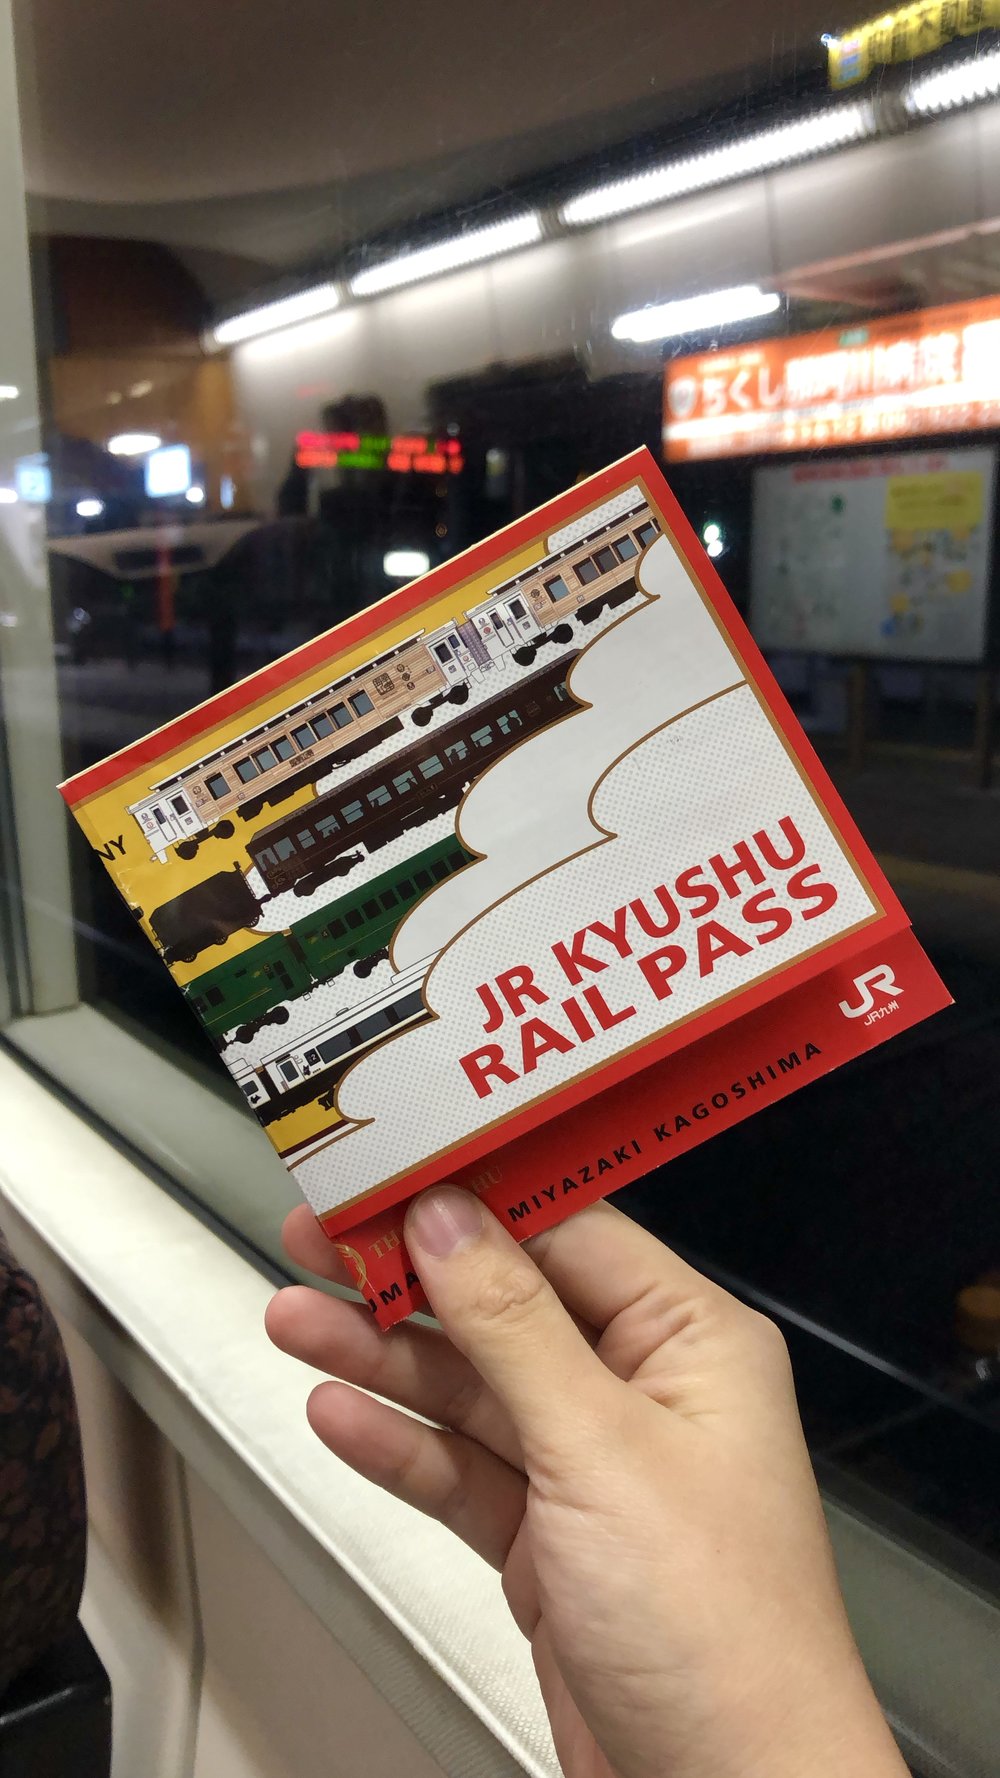 Jr Kyushu Rail Pass Complete Guide How To Book And Where To Go In Kyushu Klook Travel Blog